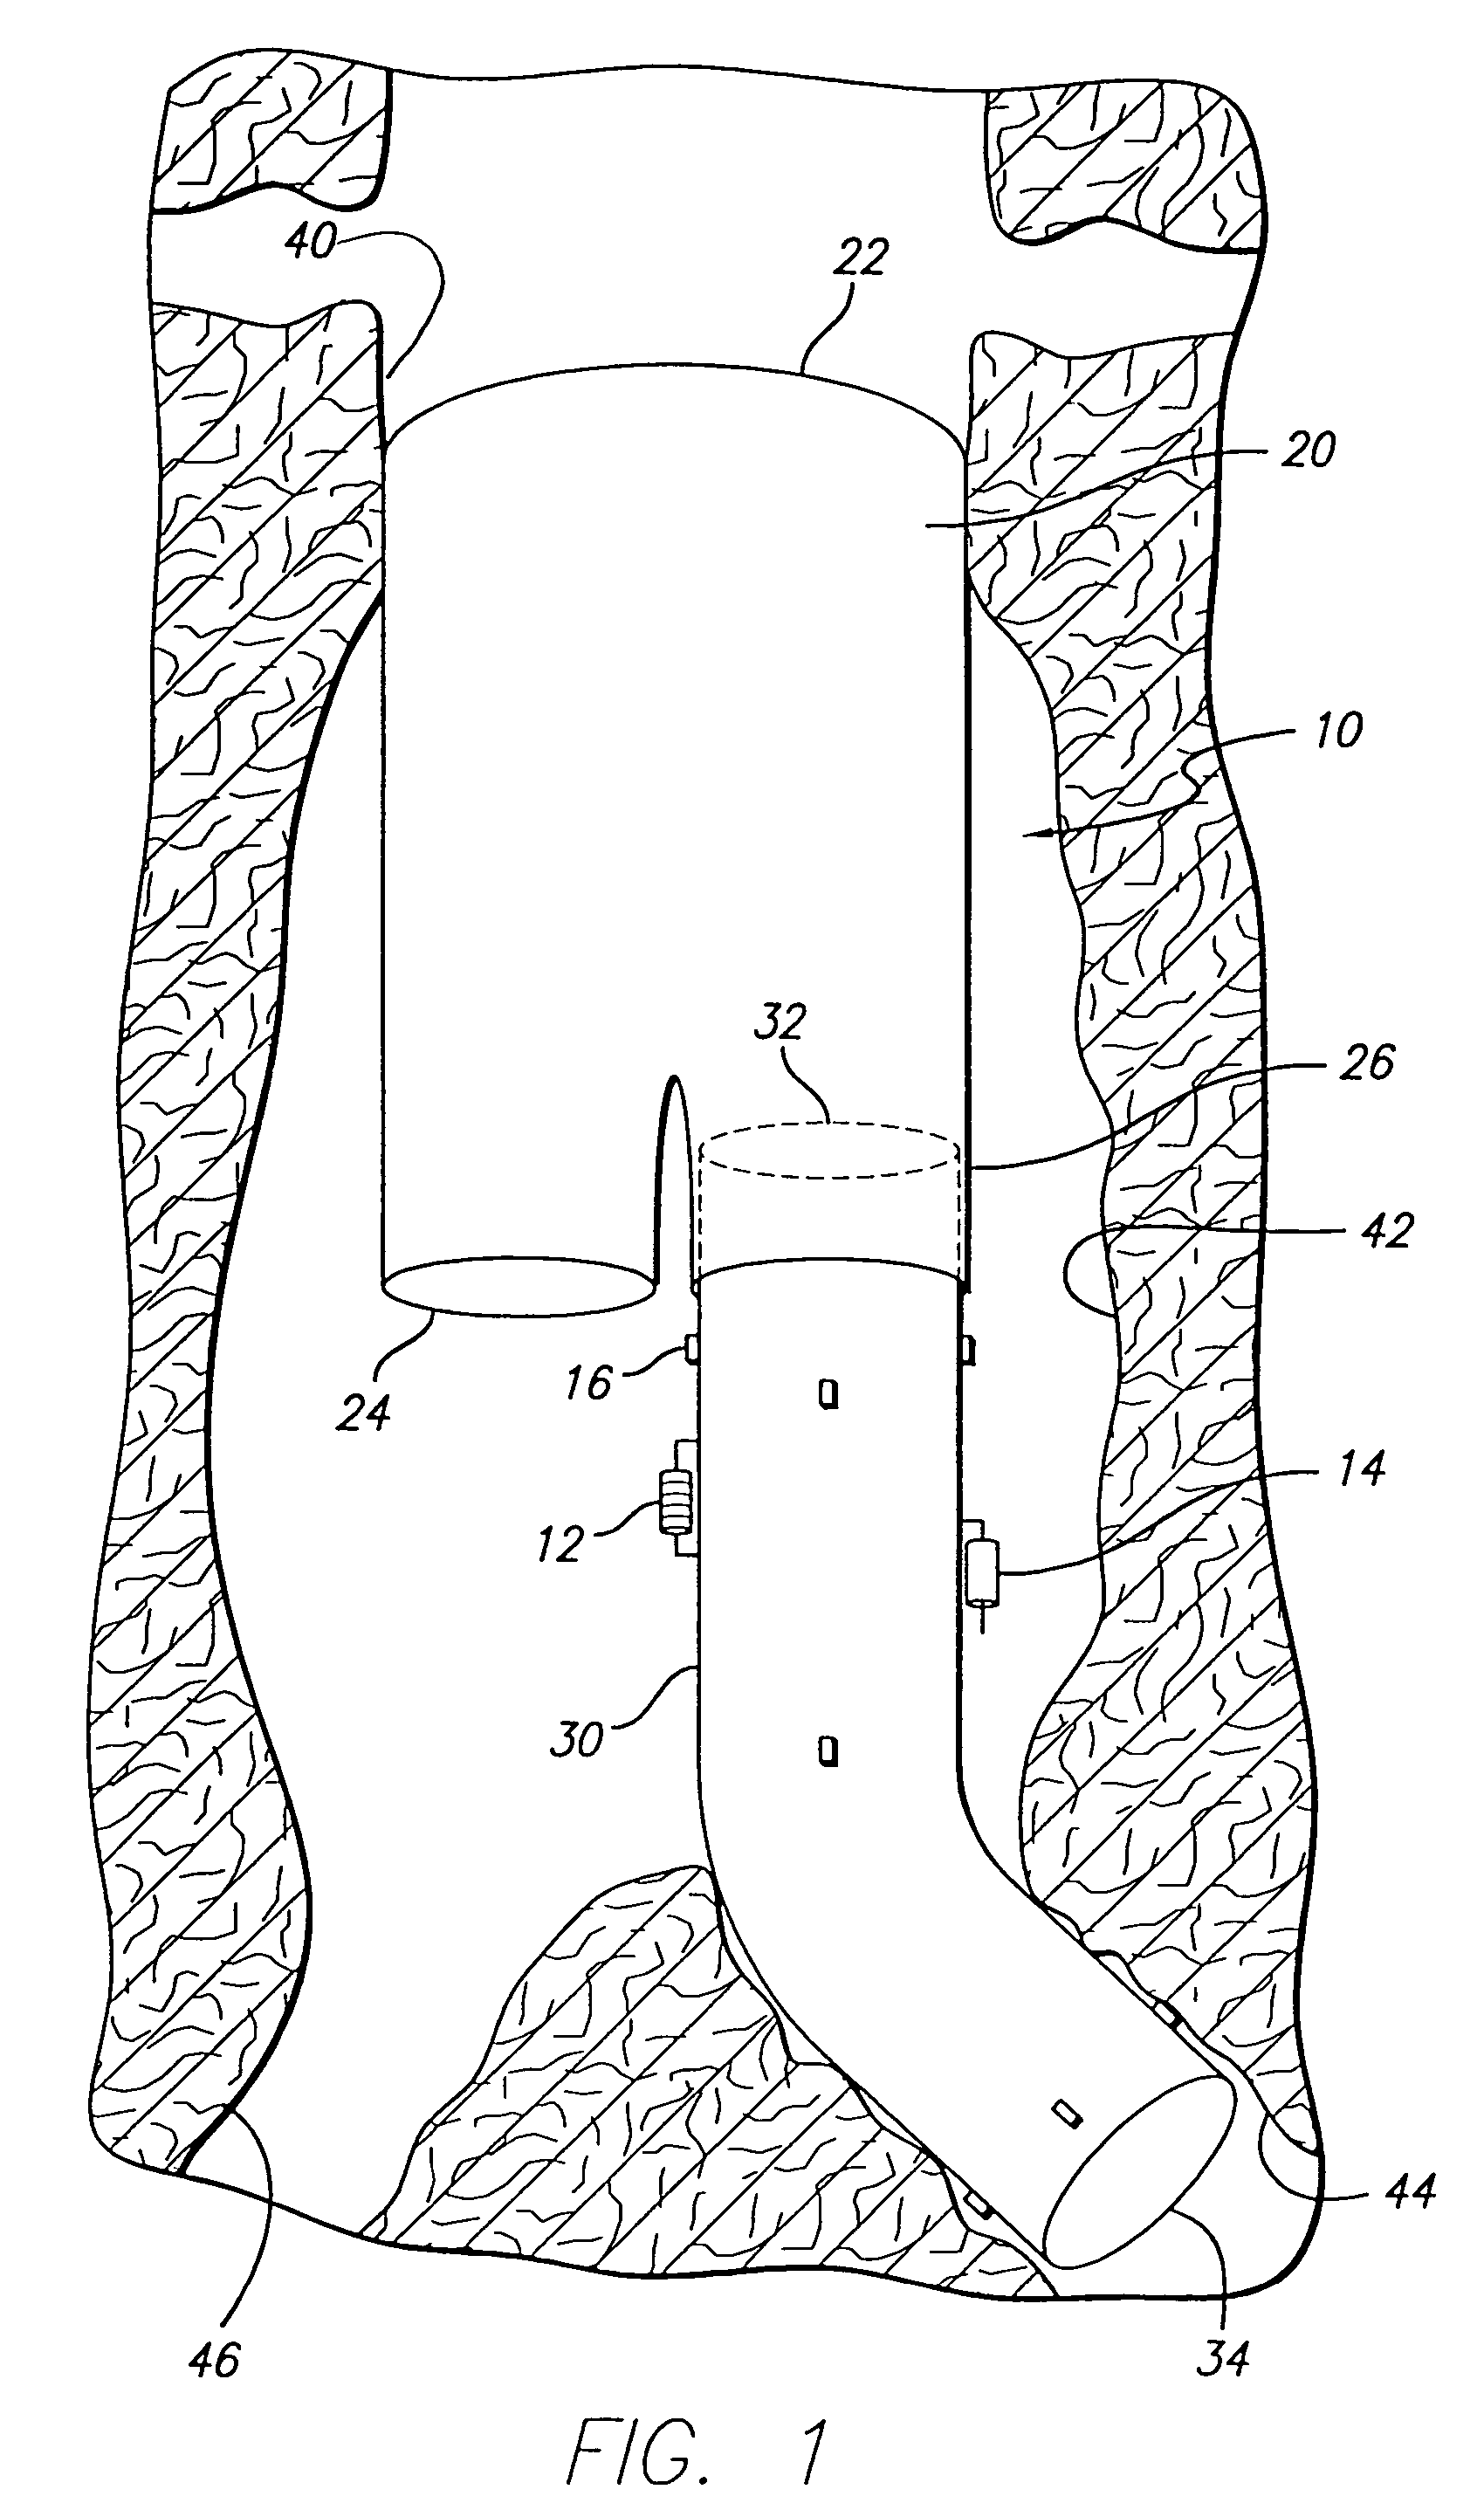 Endovascular graft with pressor and attachment methods